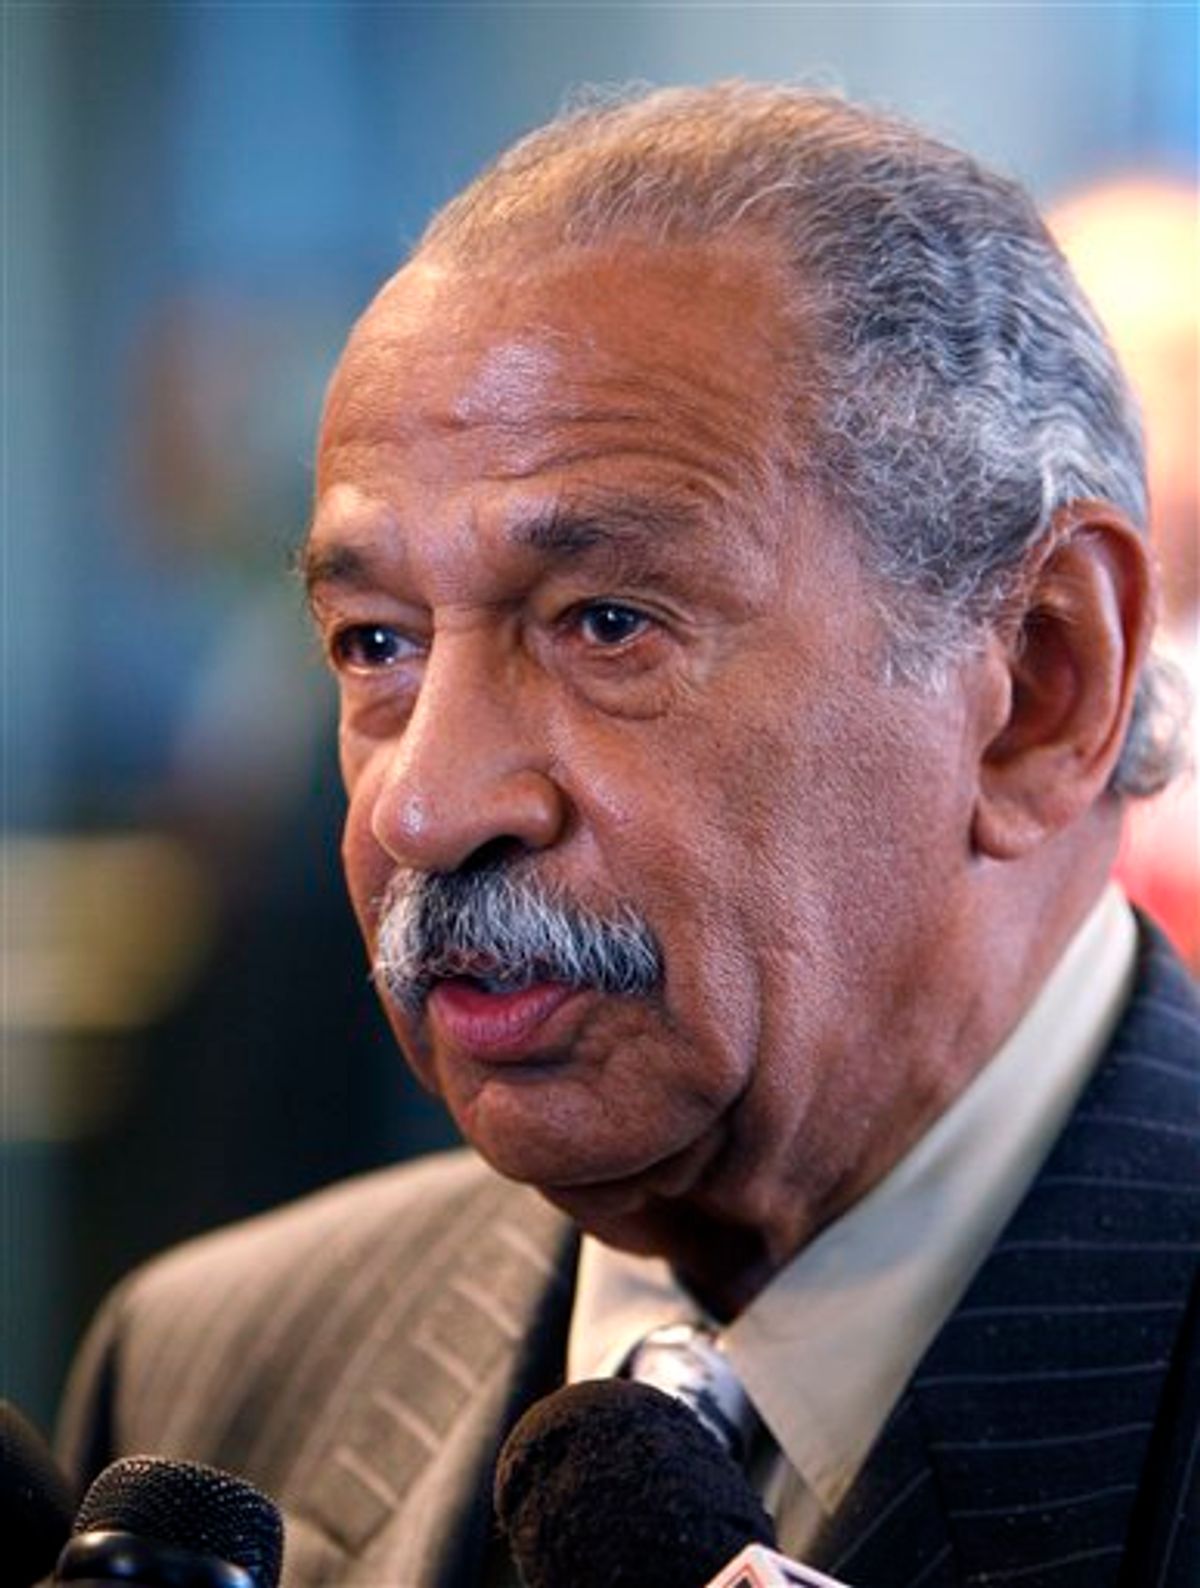 FILE - In this Nov. 9, 2009 file photo, Rep. John Conyers, D-Mich., is seen in Detroit. Conyers, the powerful chairman of the U.S. House Judiciary Committee, had his driver's license suspended for a month this summer when a check he used to pay the renewal fee bounced, according to state driving records obtained by The Associated Press. (AP Photo/Carlos Osorio, File)   (AP)